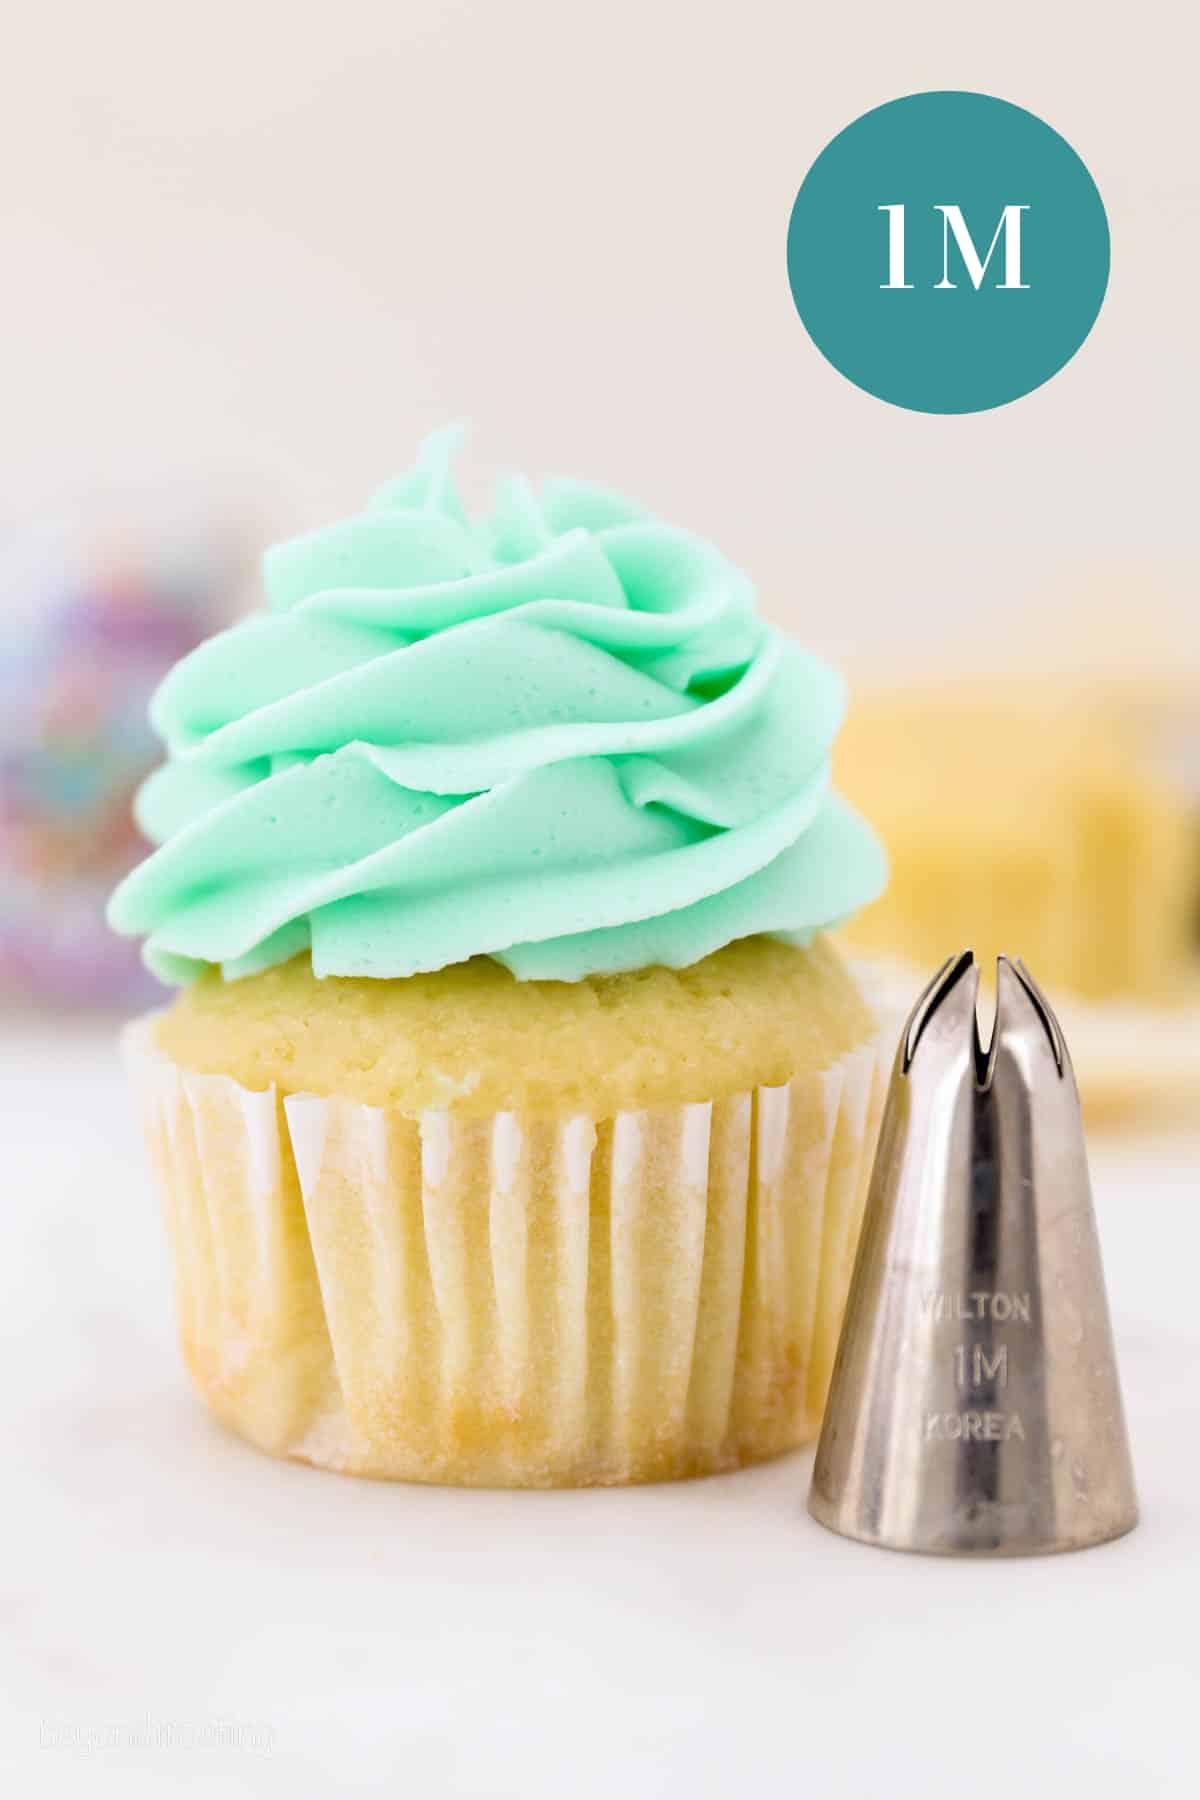 A 1M piping tip next to a frosted cupcake piped with a 1M swirl.